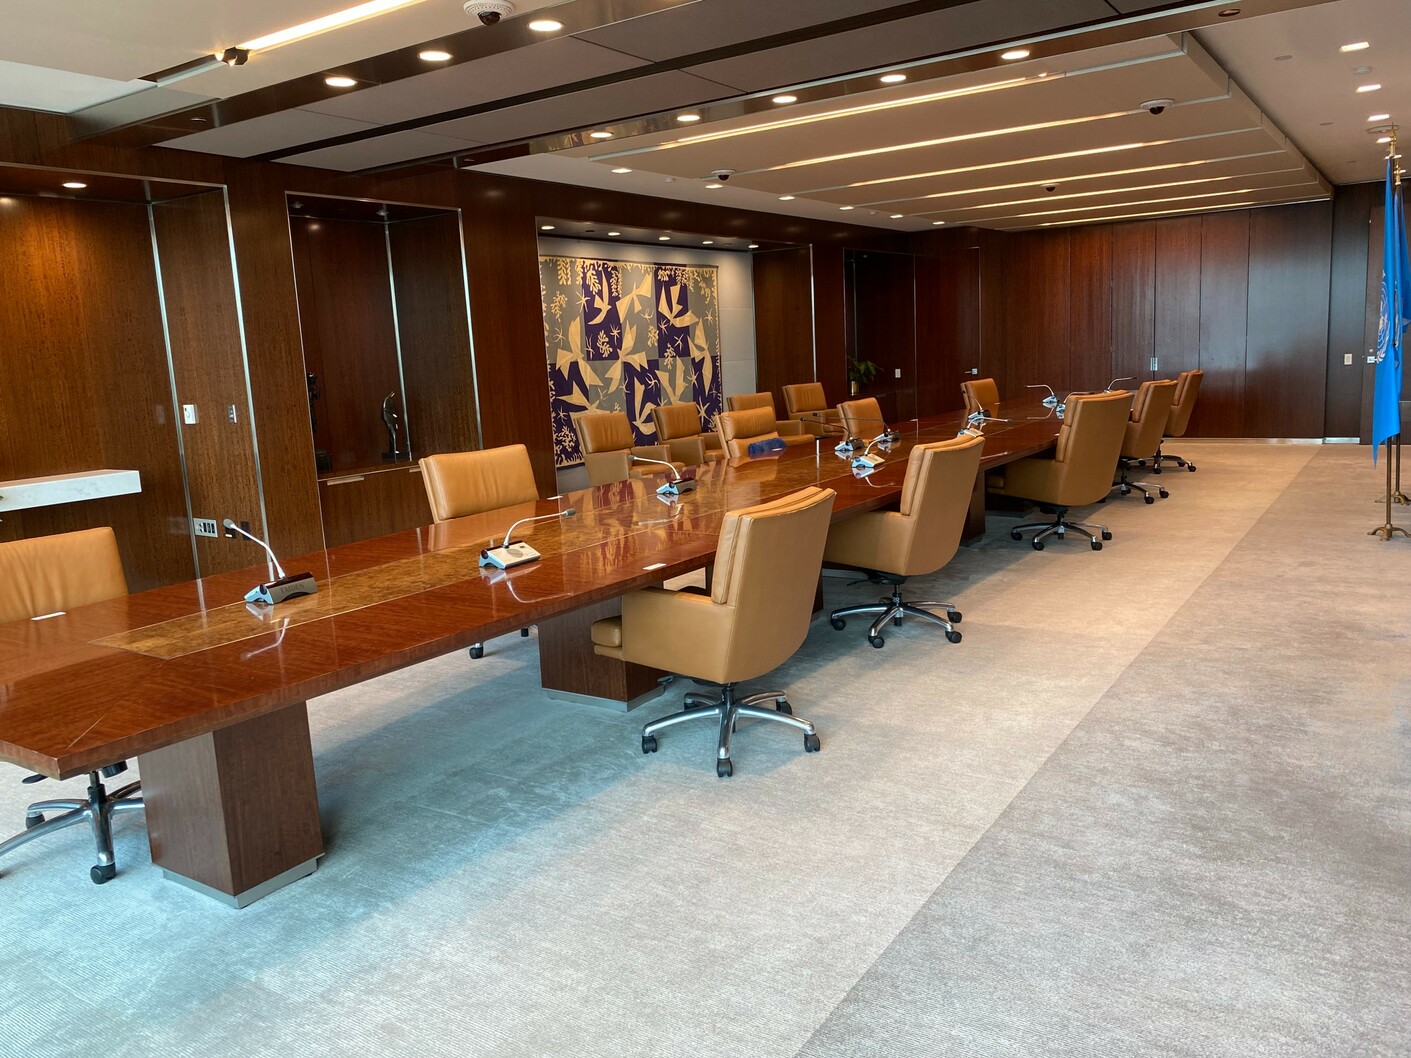 Renovated Secretary-General Suite: Conference/Dining Room, UNNY028G, 1973, Austria